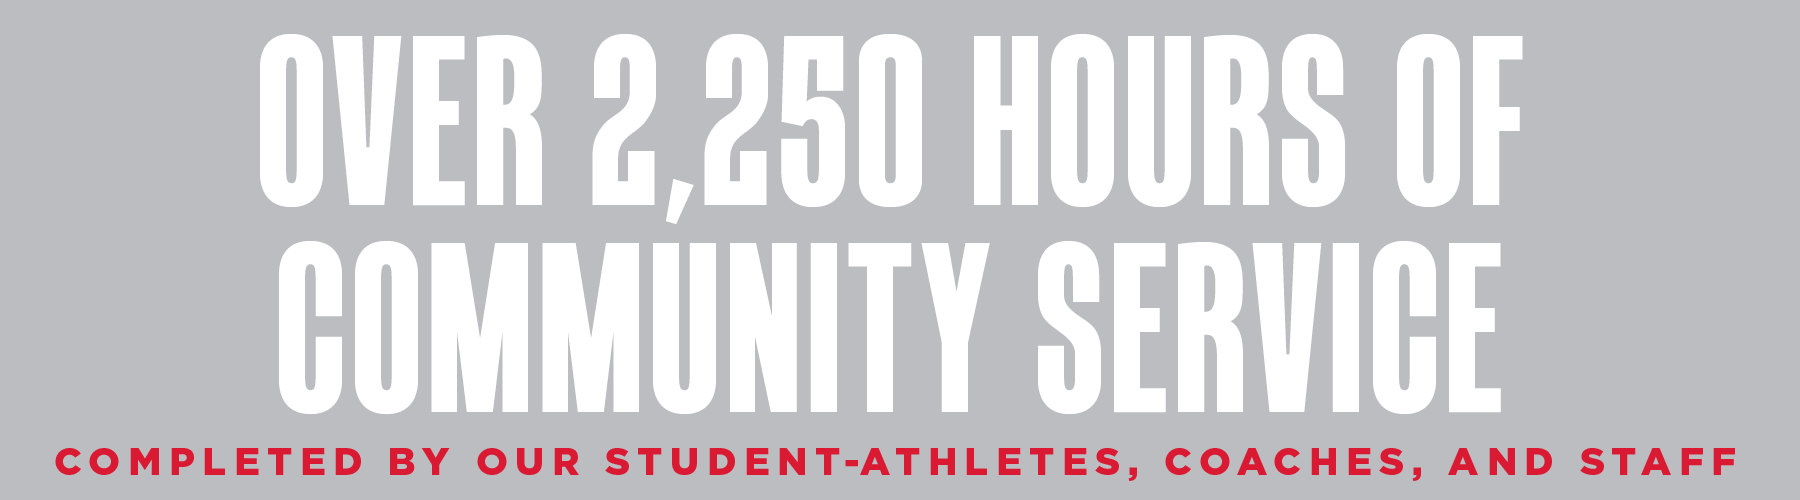 Over 2,250 Hours of Community Service Completed by our Student-Athletes, Coaches, and Staff